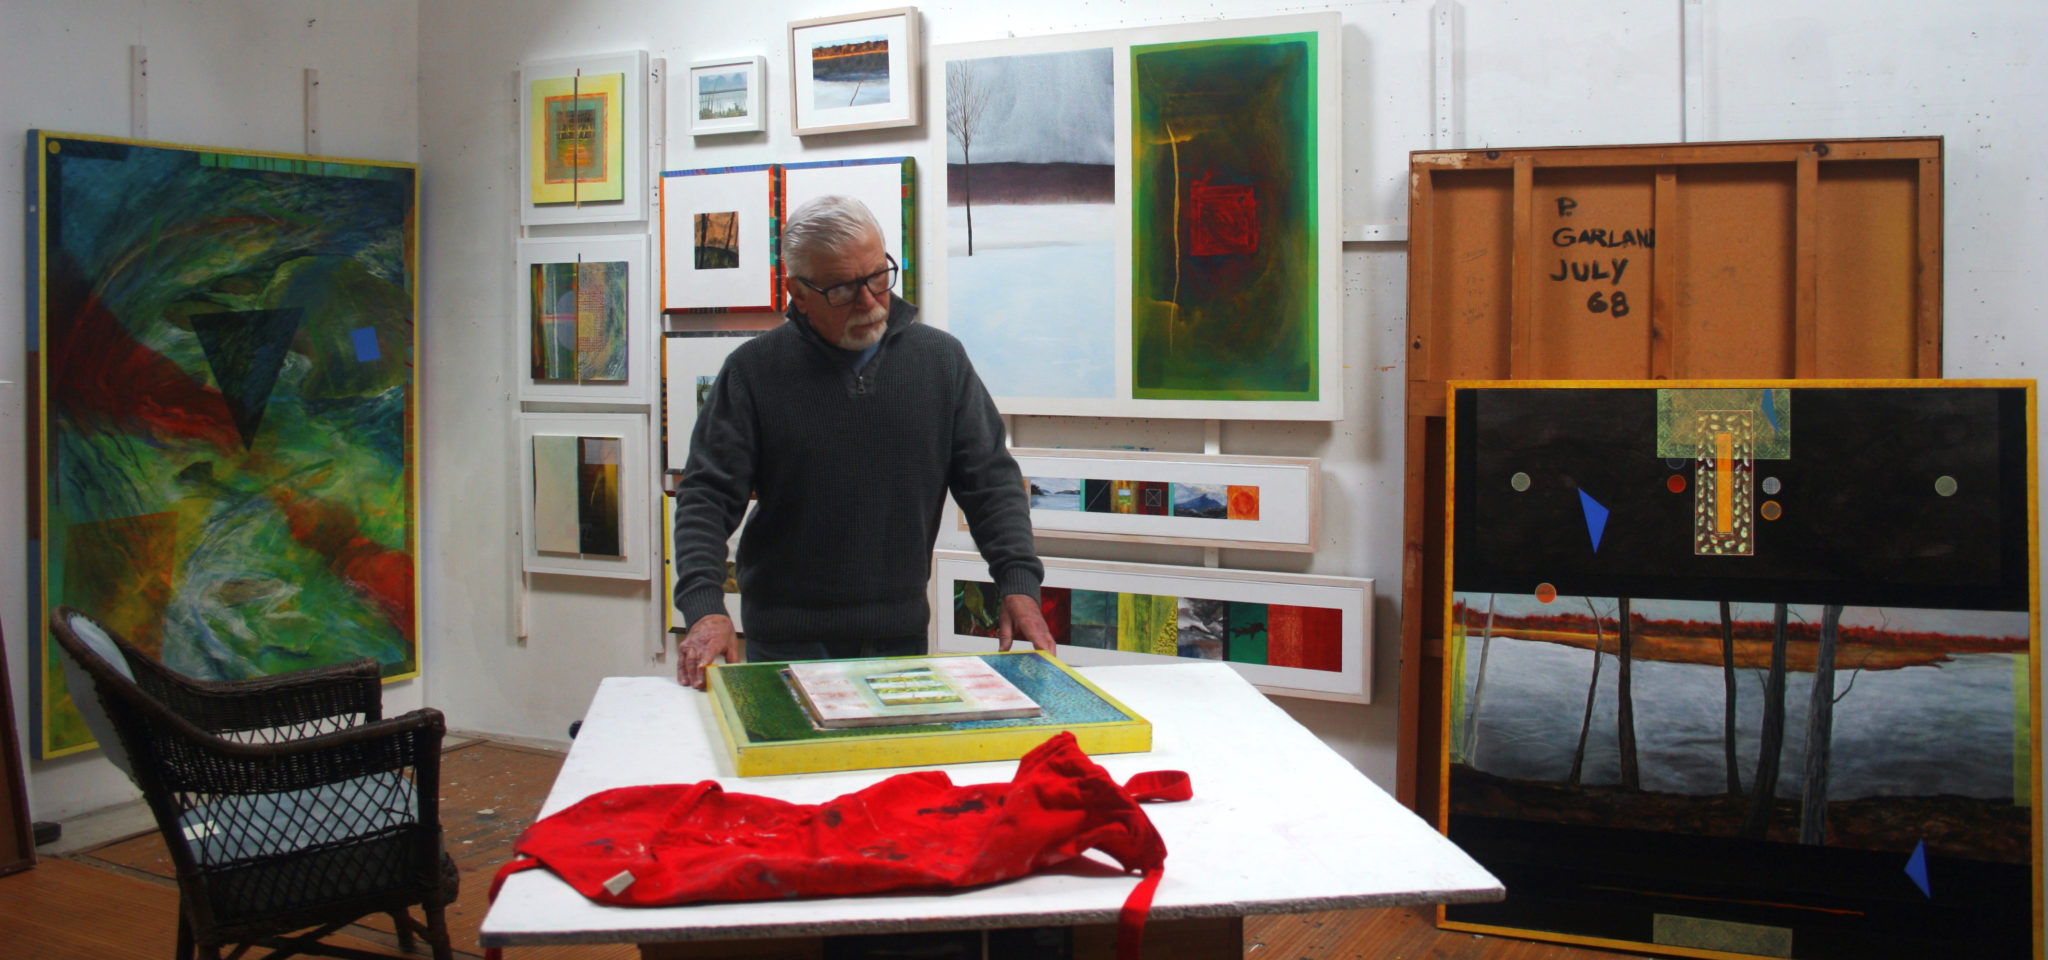 Paul Garland standing at a table, looking down at one of his paintings, in the middle of his studio.